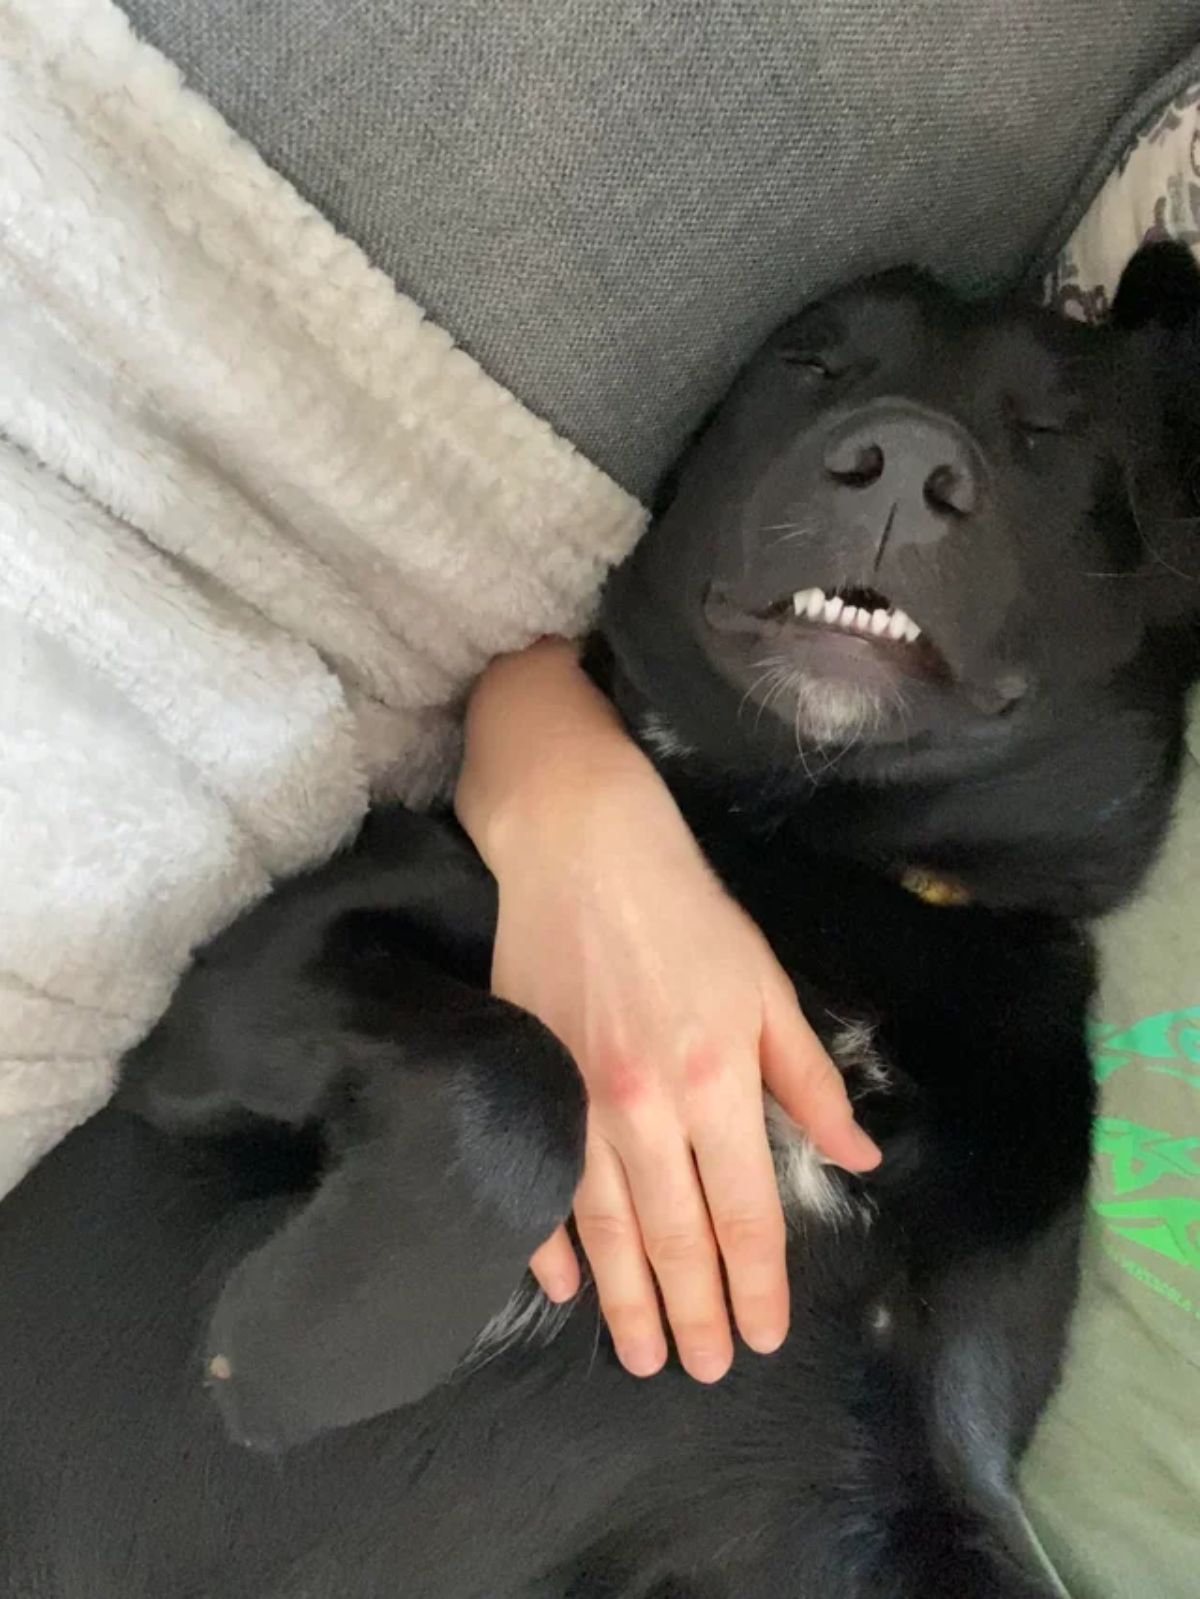 black dog with the bottom teeth showing and sleeping belly up on a sofa while being held by someone